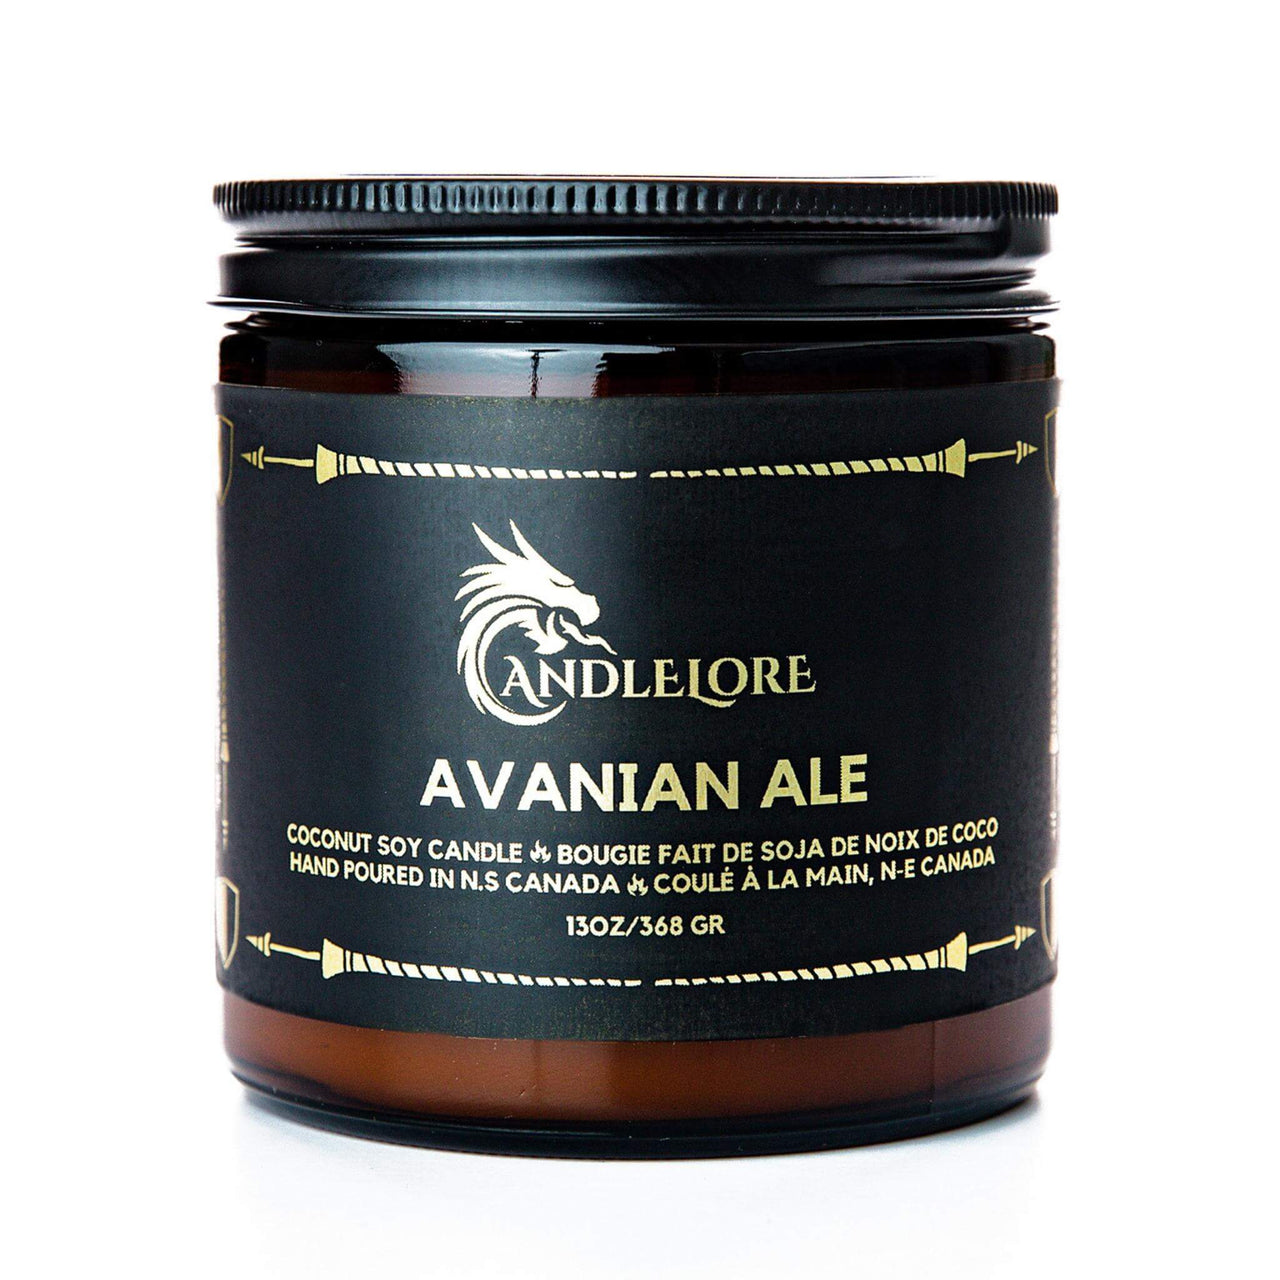 Large Avanian Ale scented candle on a white background